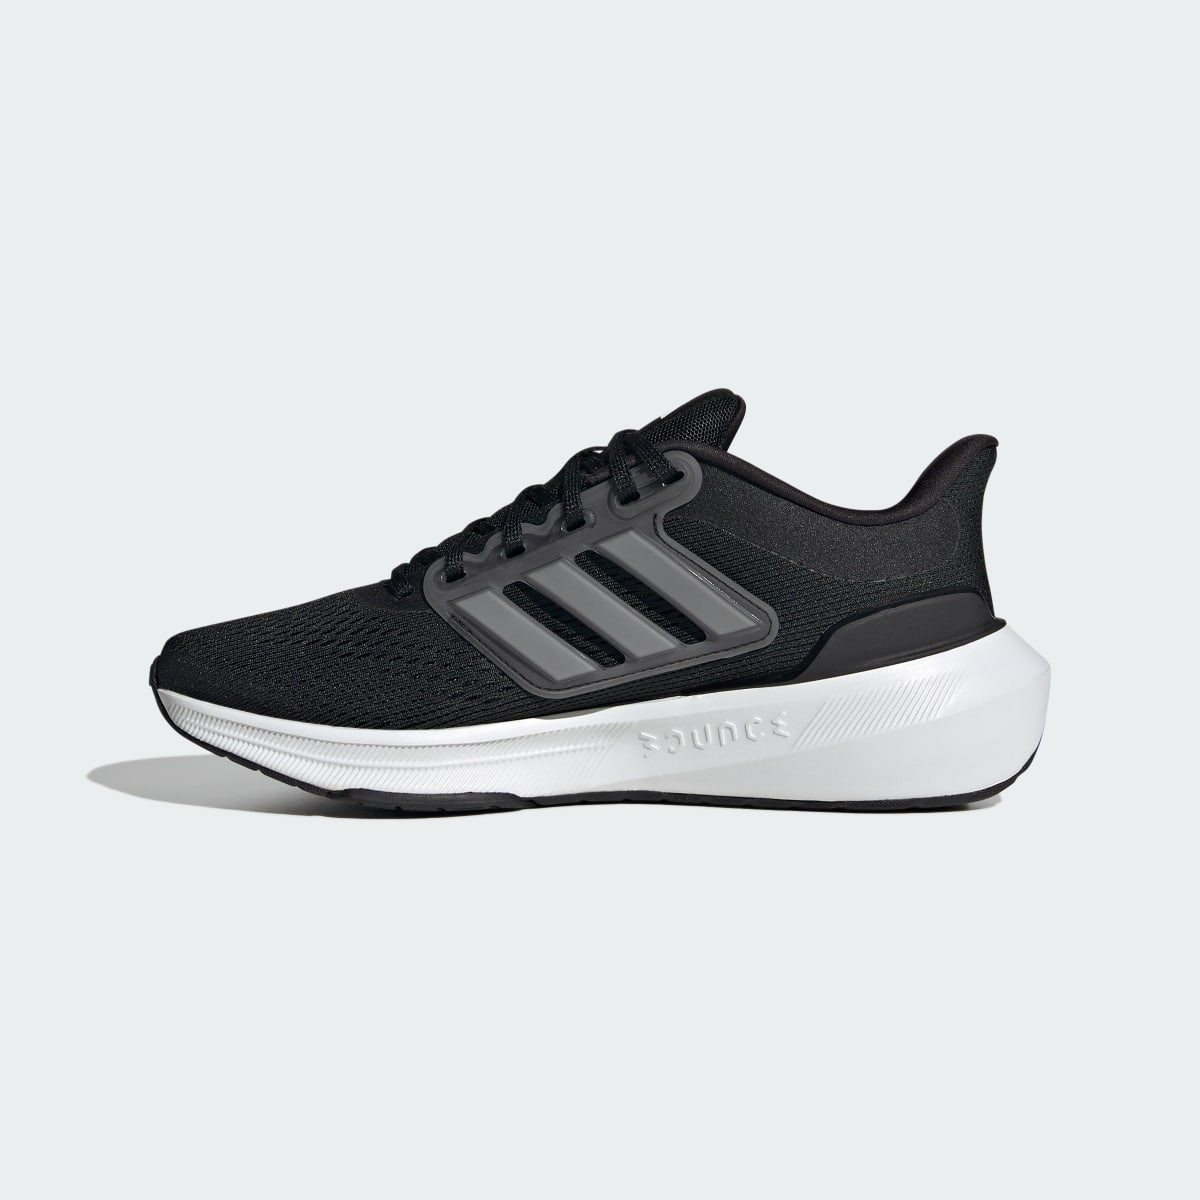 Adidas Ultrabounce Wide Shoes. 7